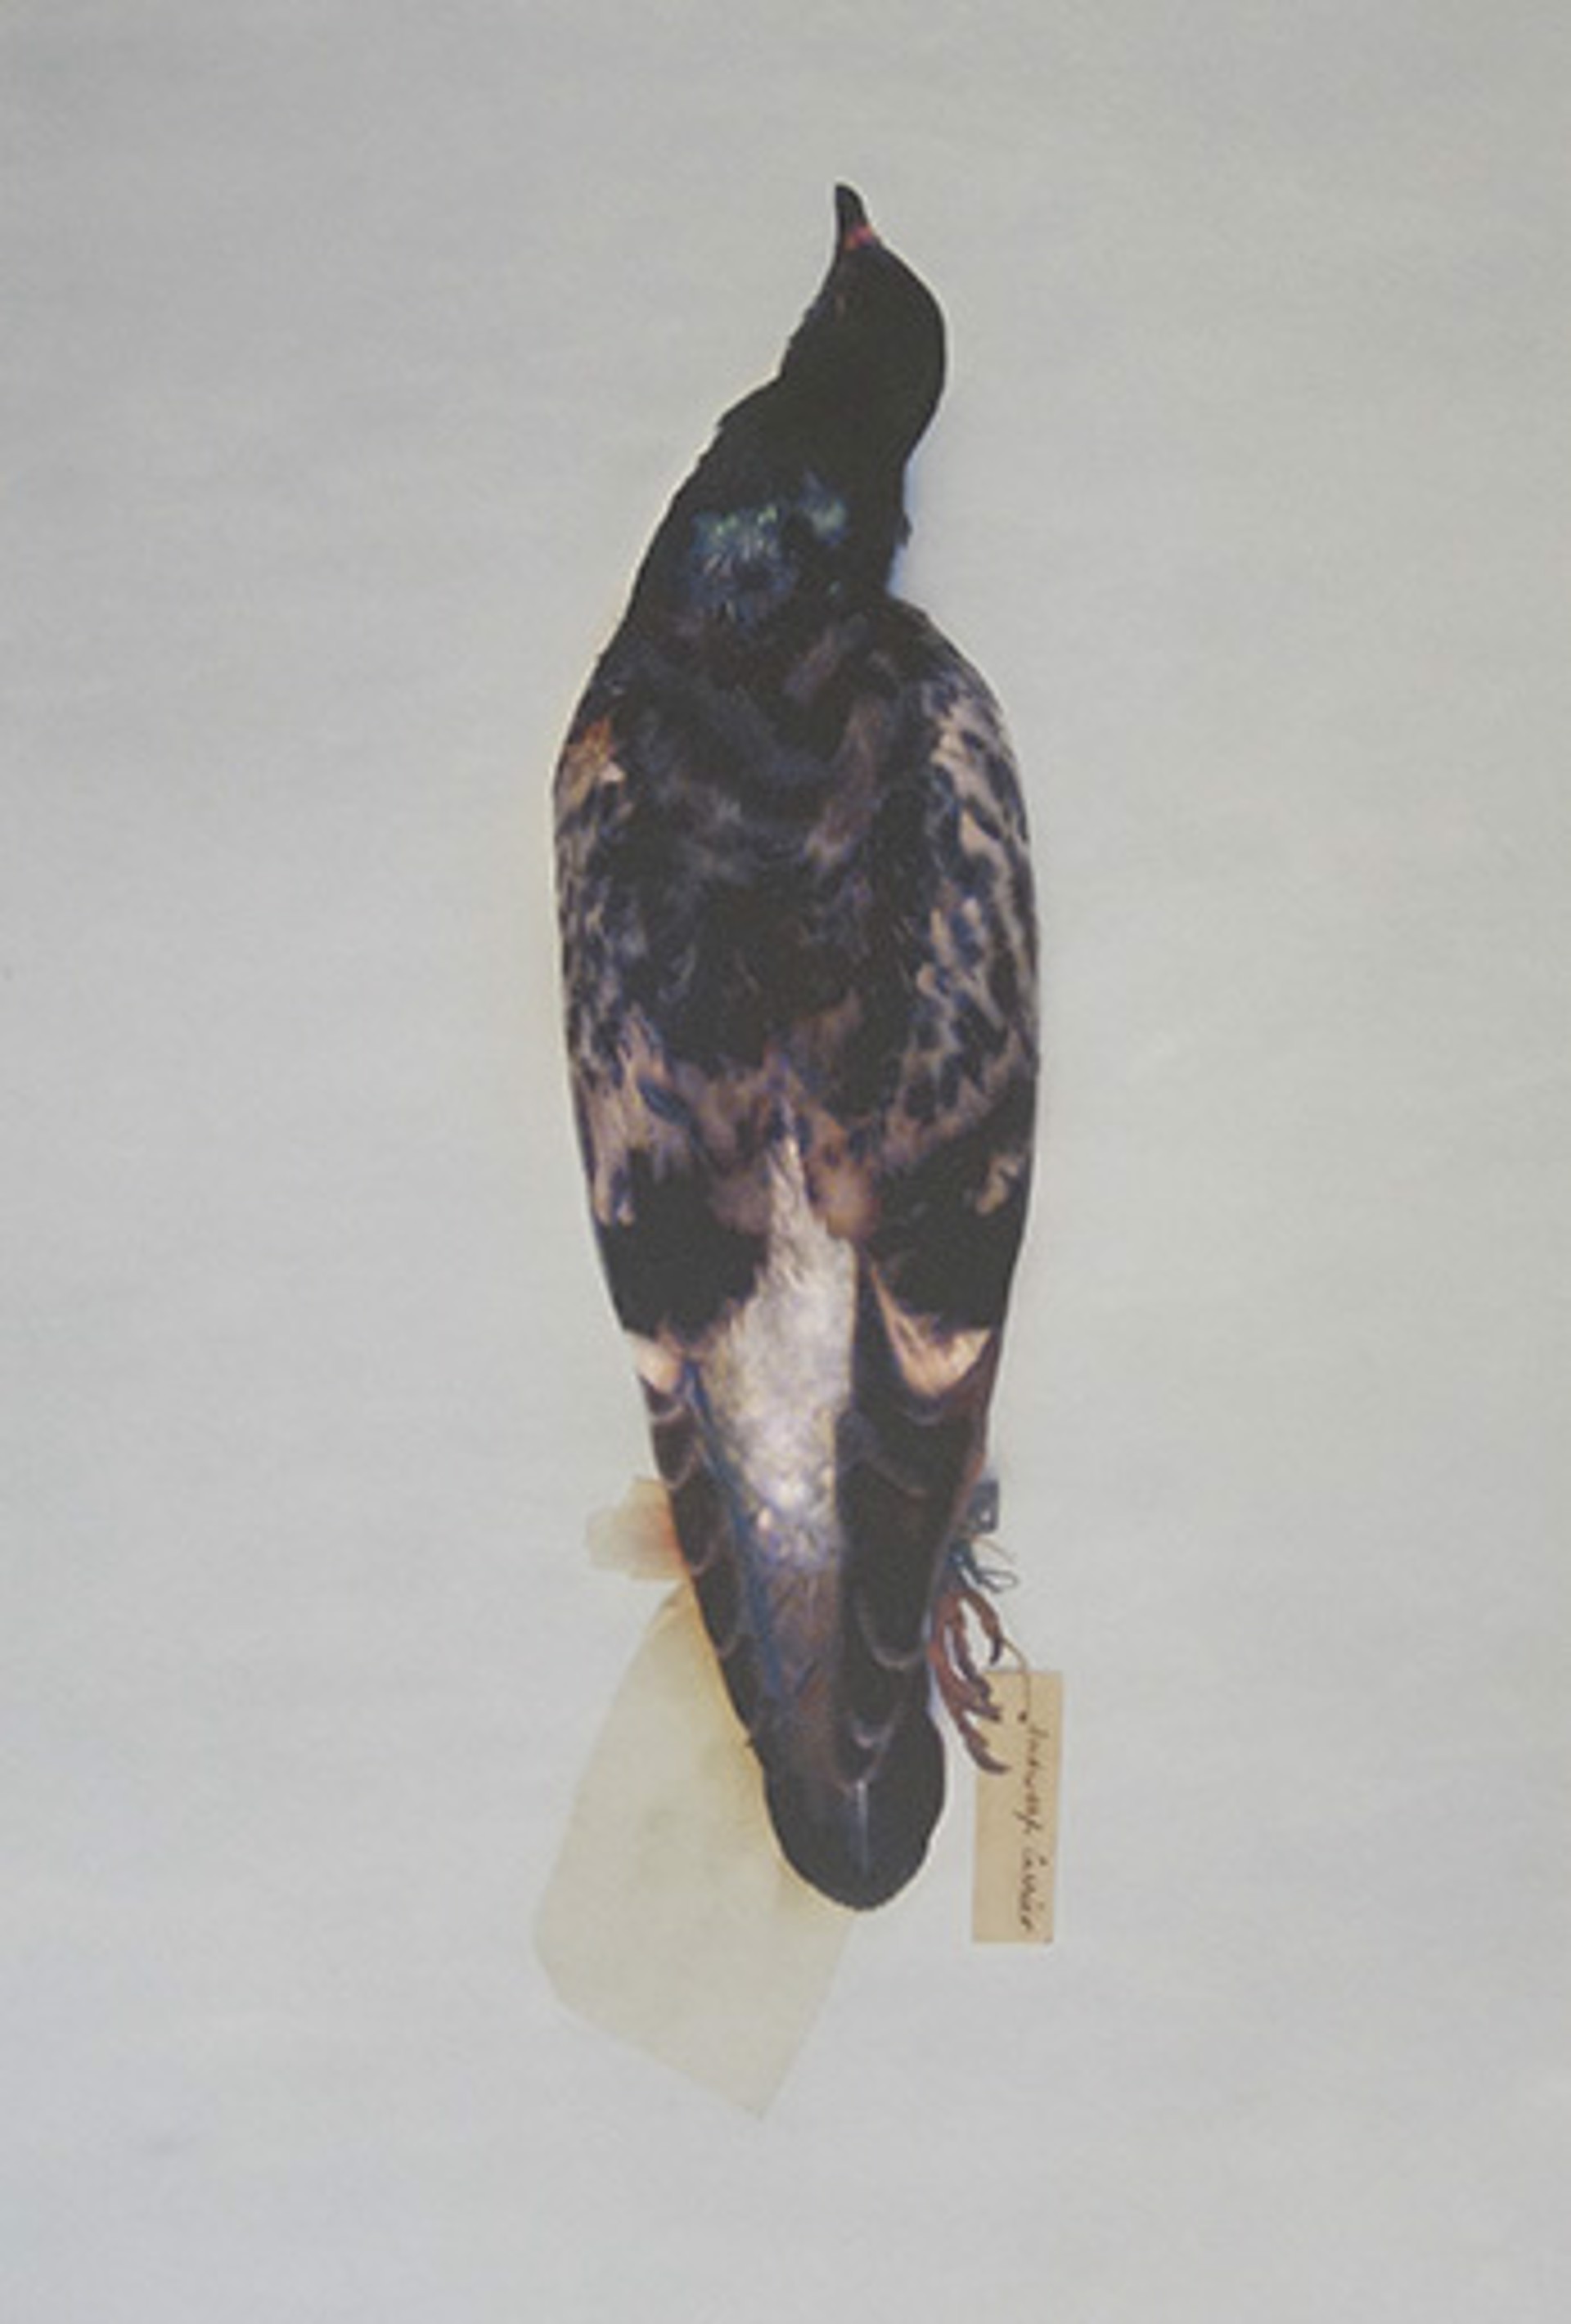 A Habit of Deciding Influence: Pigeons From Charles Darwin's Breeding Experiments by Brandon Ballengée